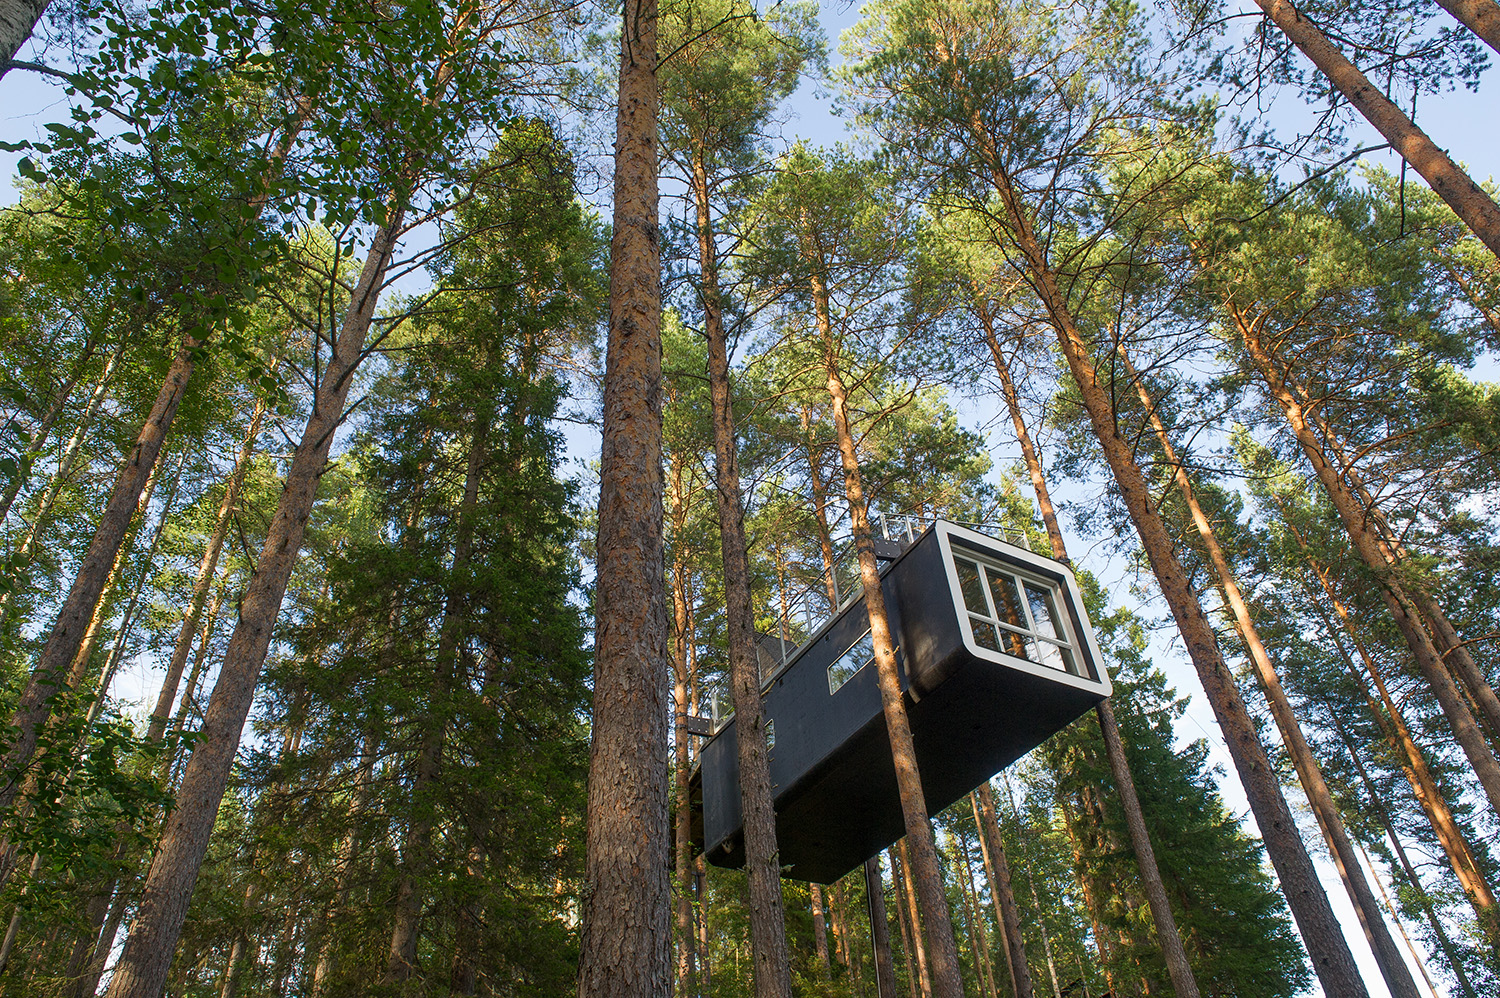 The Cabin at Treehotel, Sweden Photo by O.C Ritz/Shutterstock